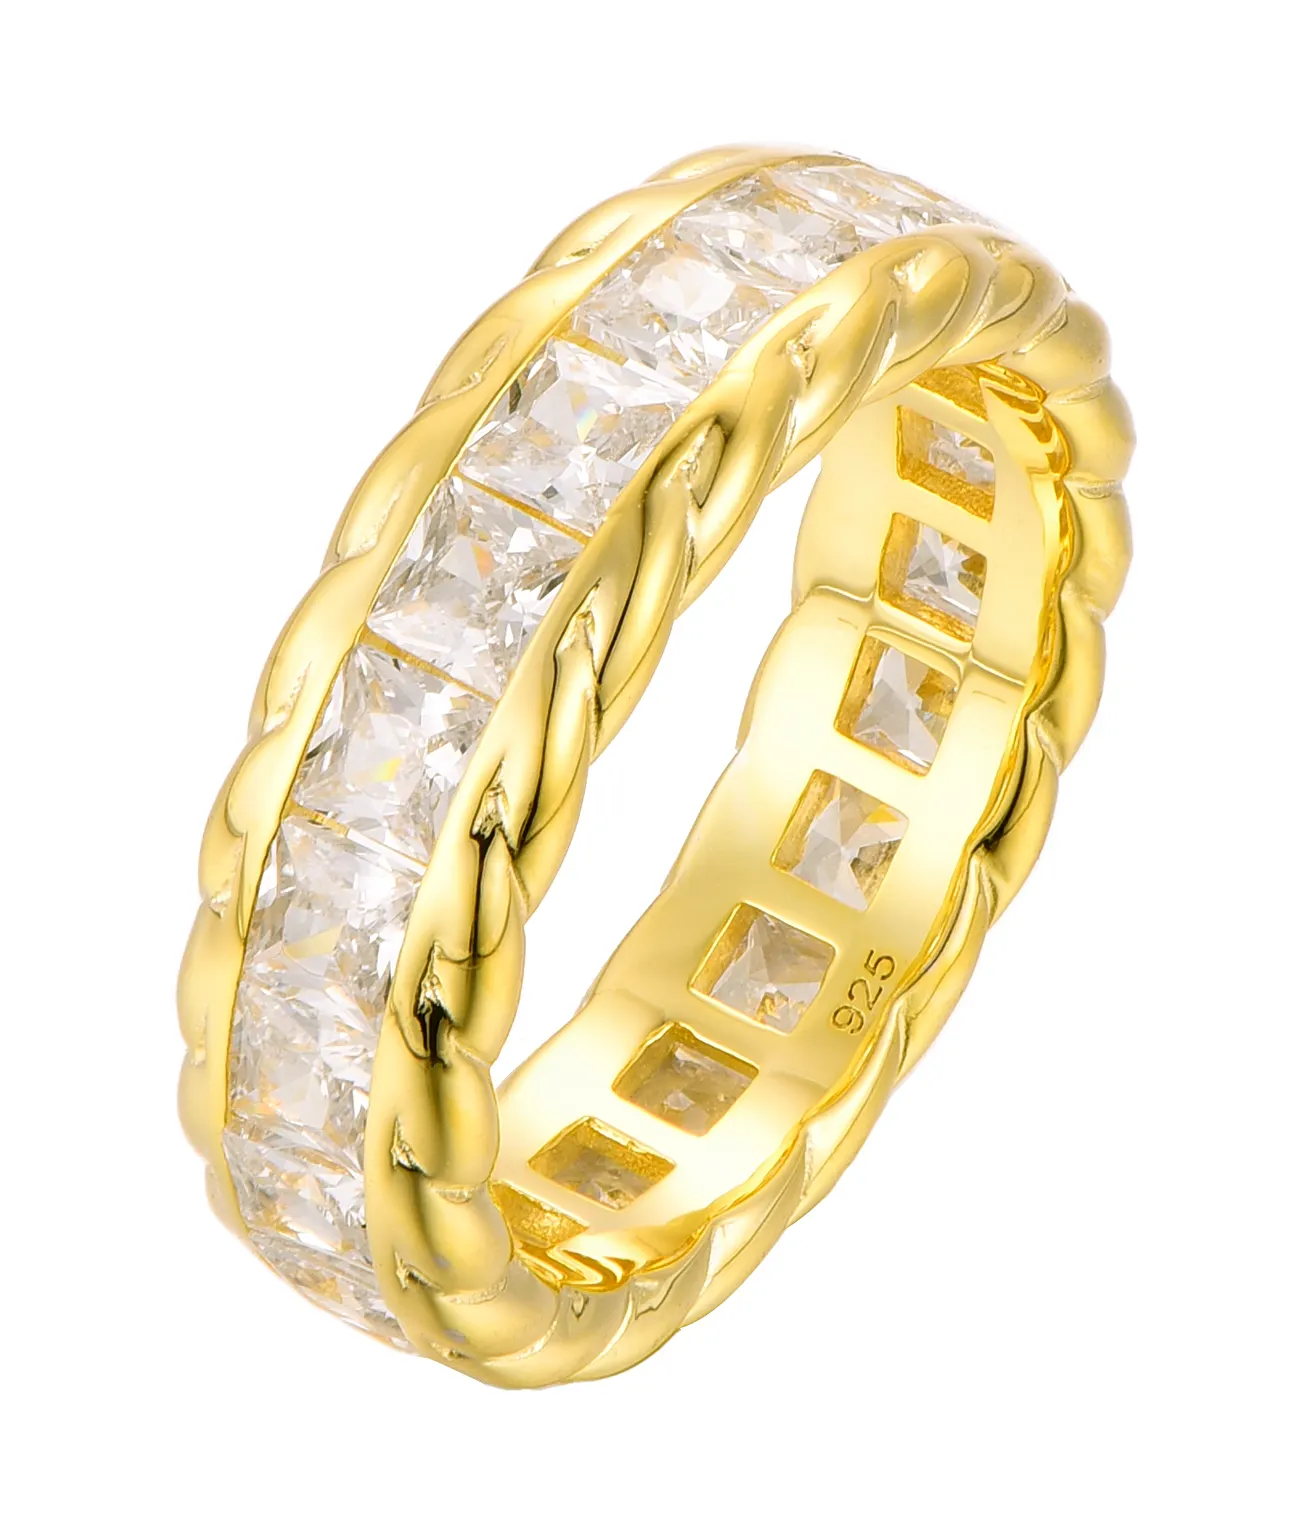 Waterproof Non Tarnish Gold Jewelry 18K Gold Plated 925 Sterling Silver CZ Ring Twist Ring Cuban Link Ring For Women Jewelry